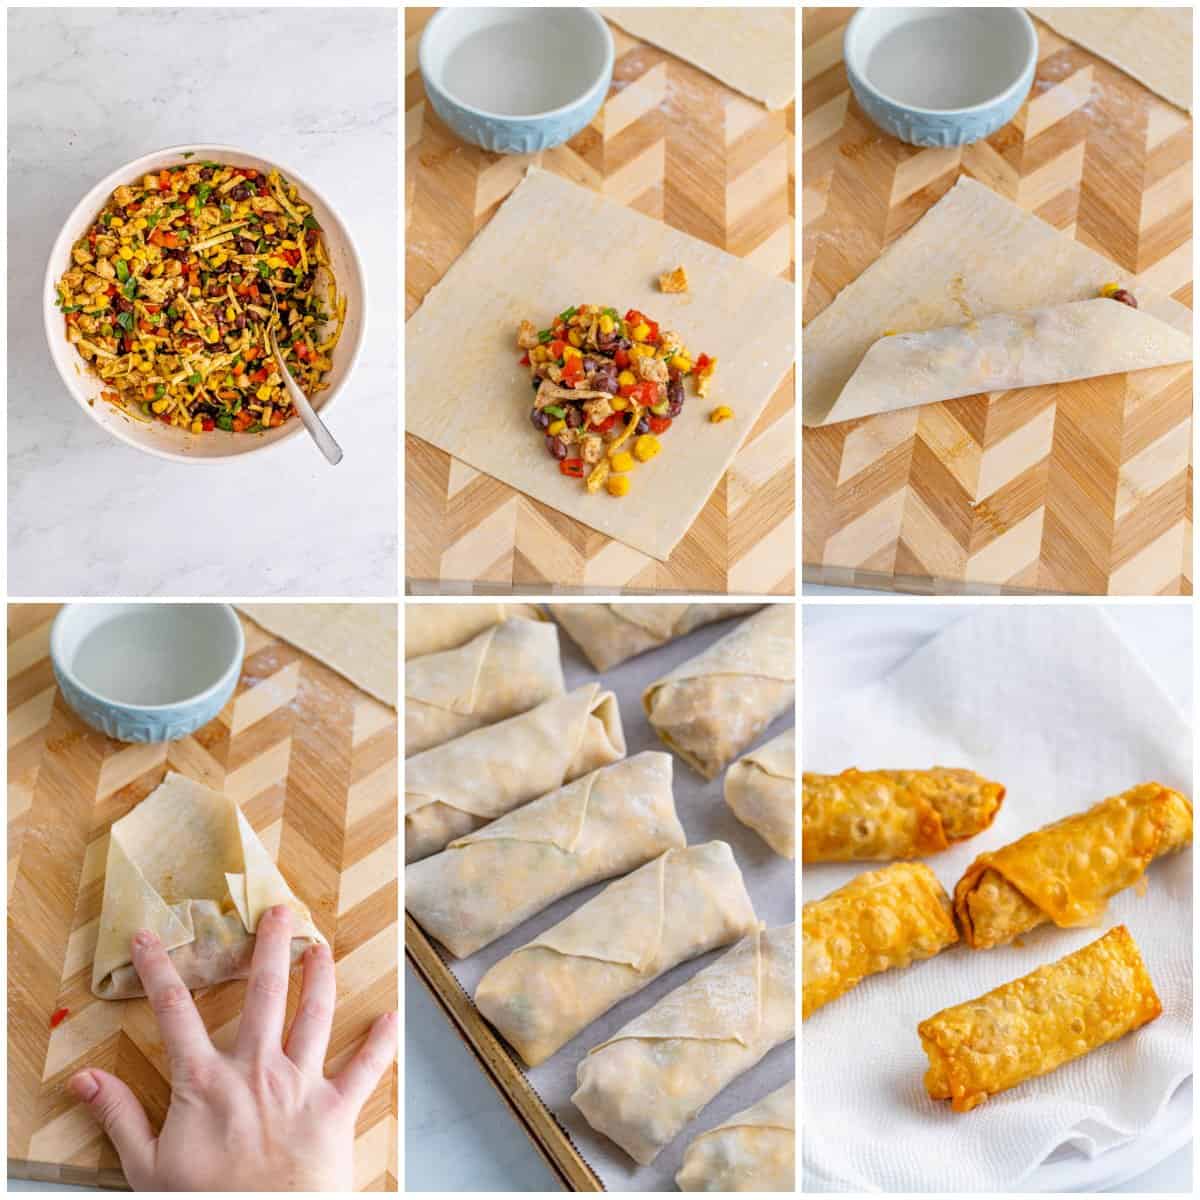 Step by step photos on how to make Southwest Egg Rolls.